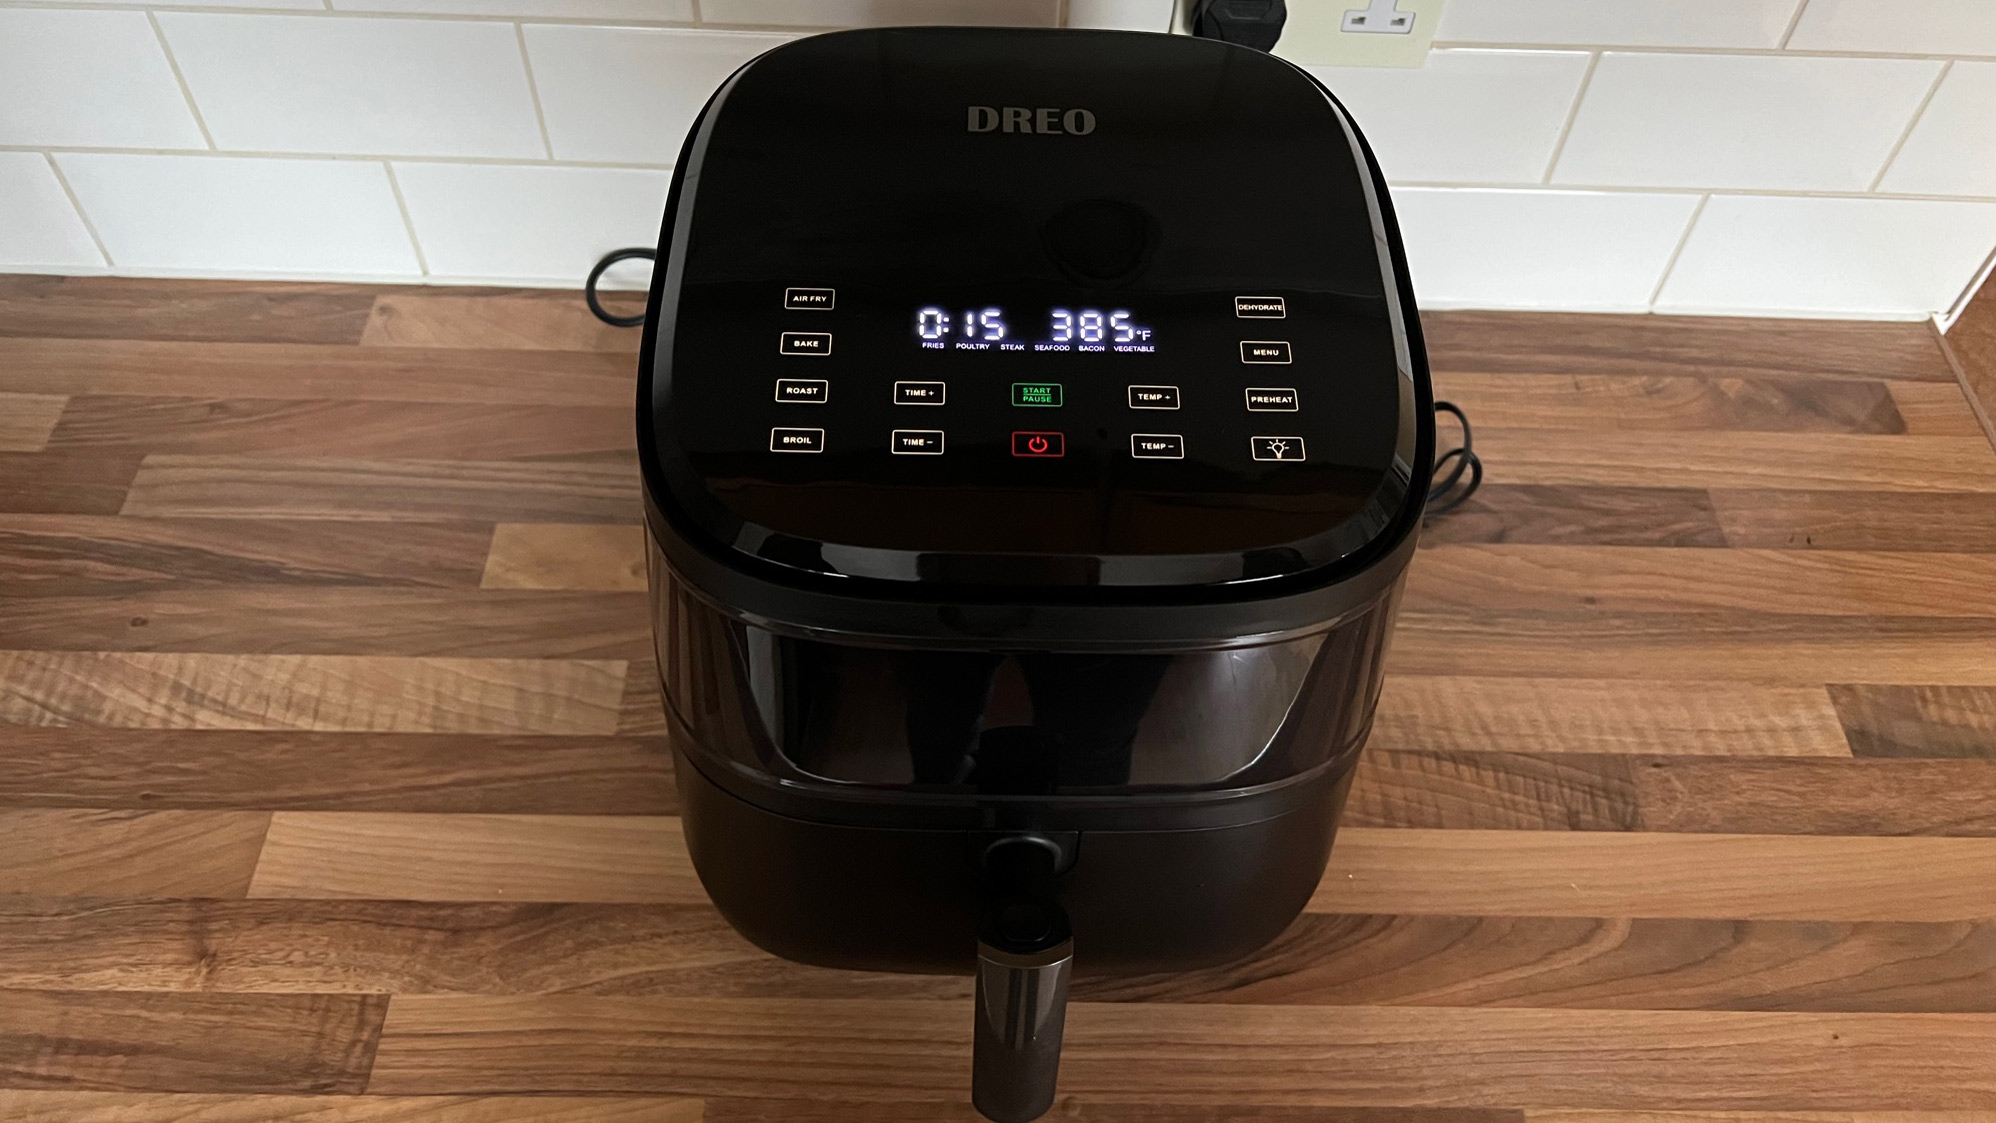 The top view of the Dreo 6-Quart Air Fryer featuring the control panel